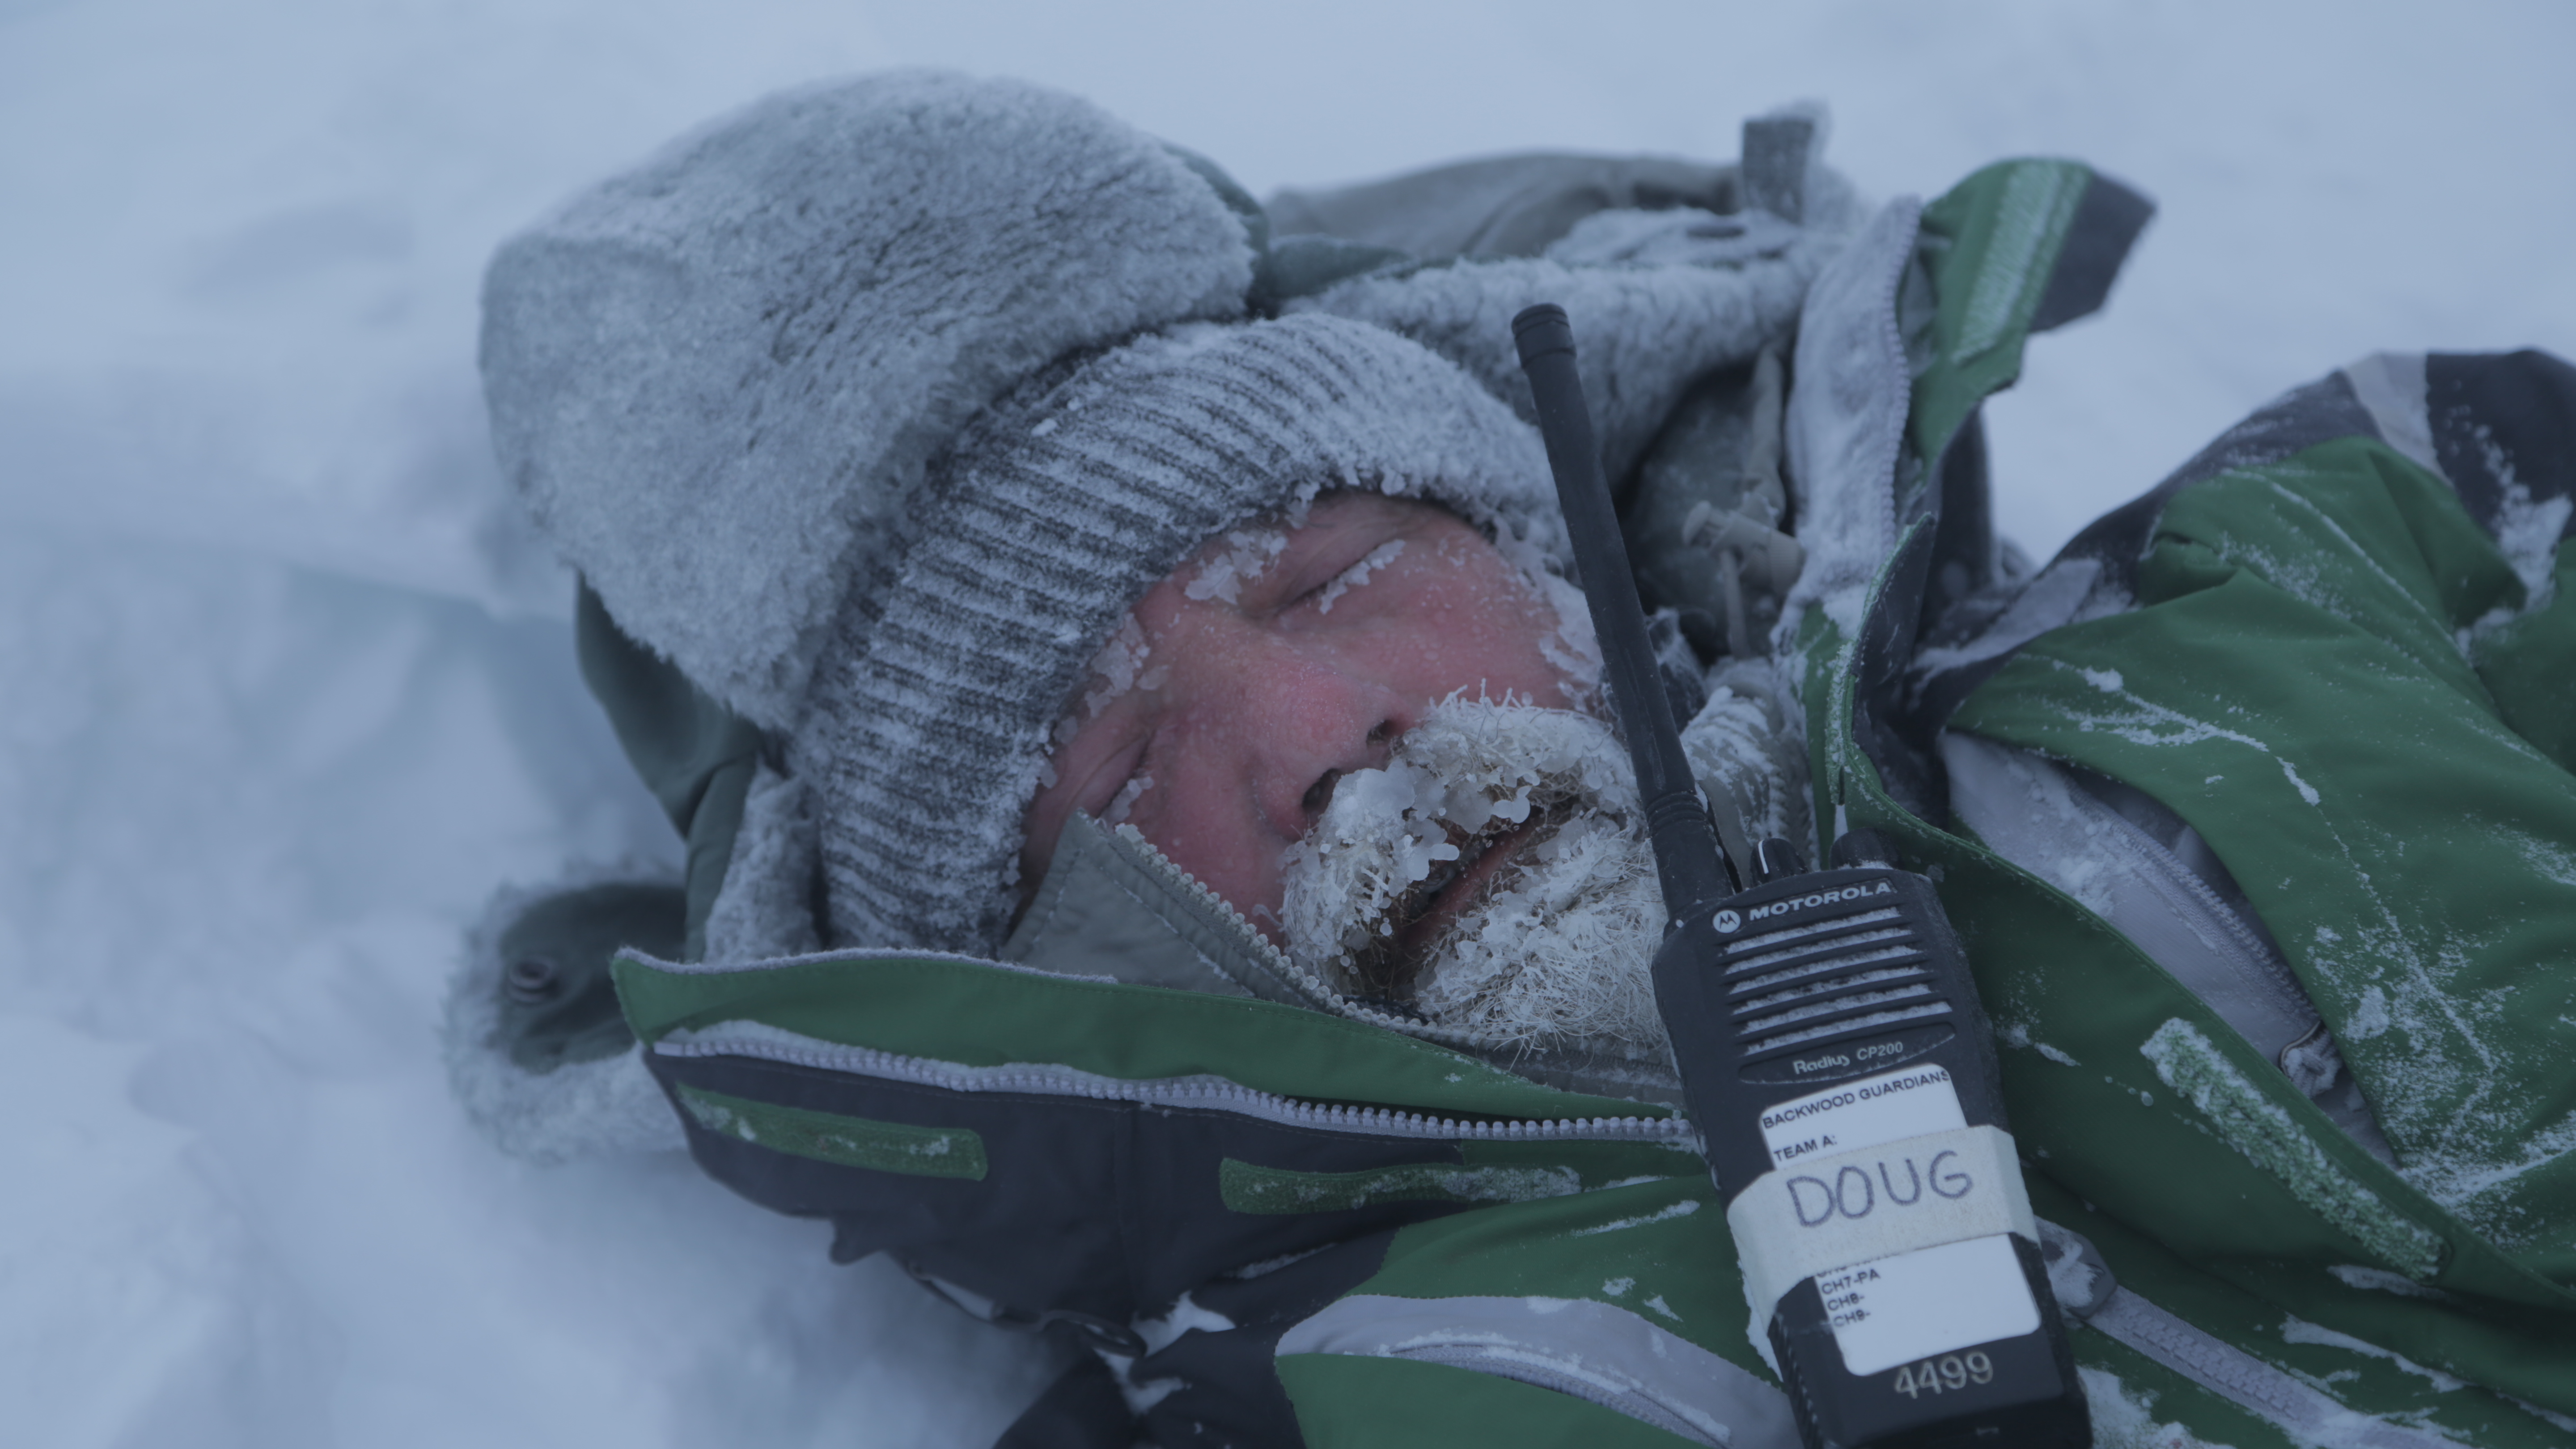 Napping in the Arctic during a white-out blizzard.